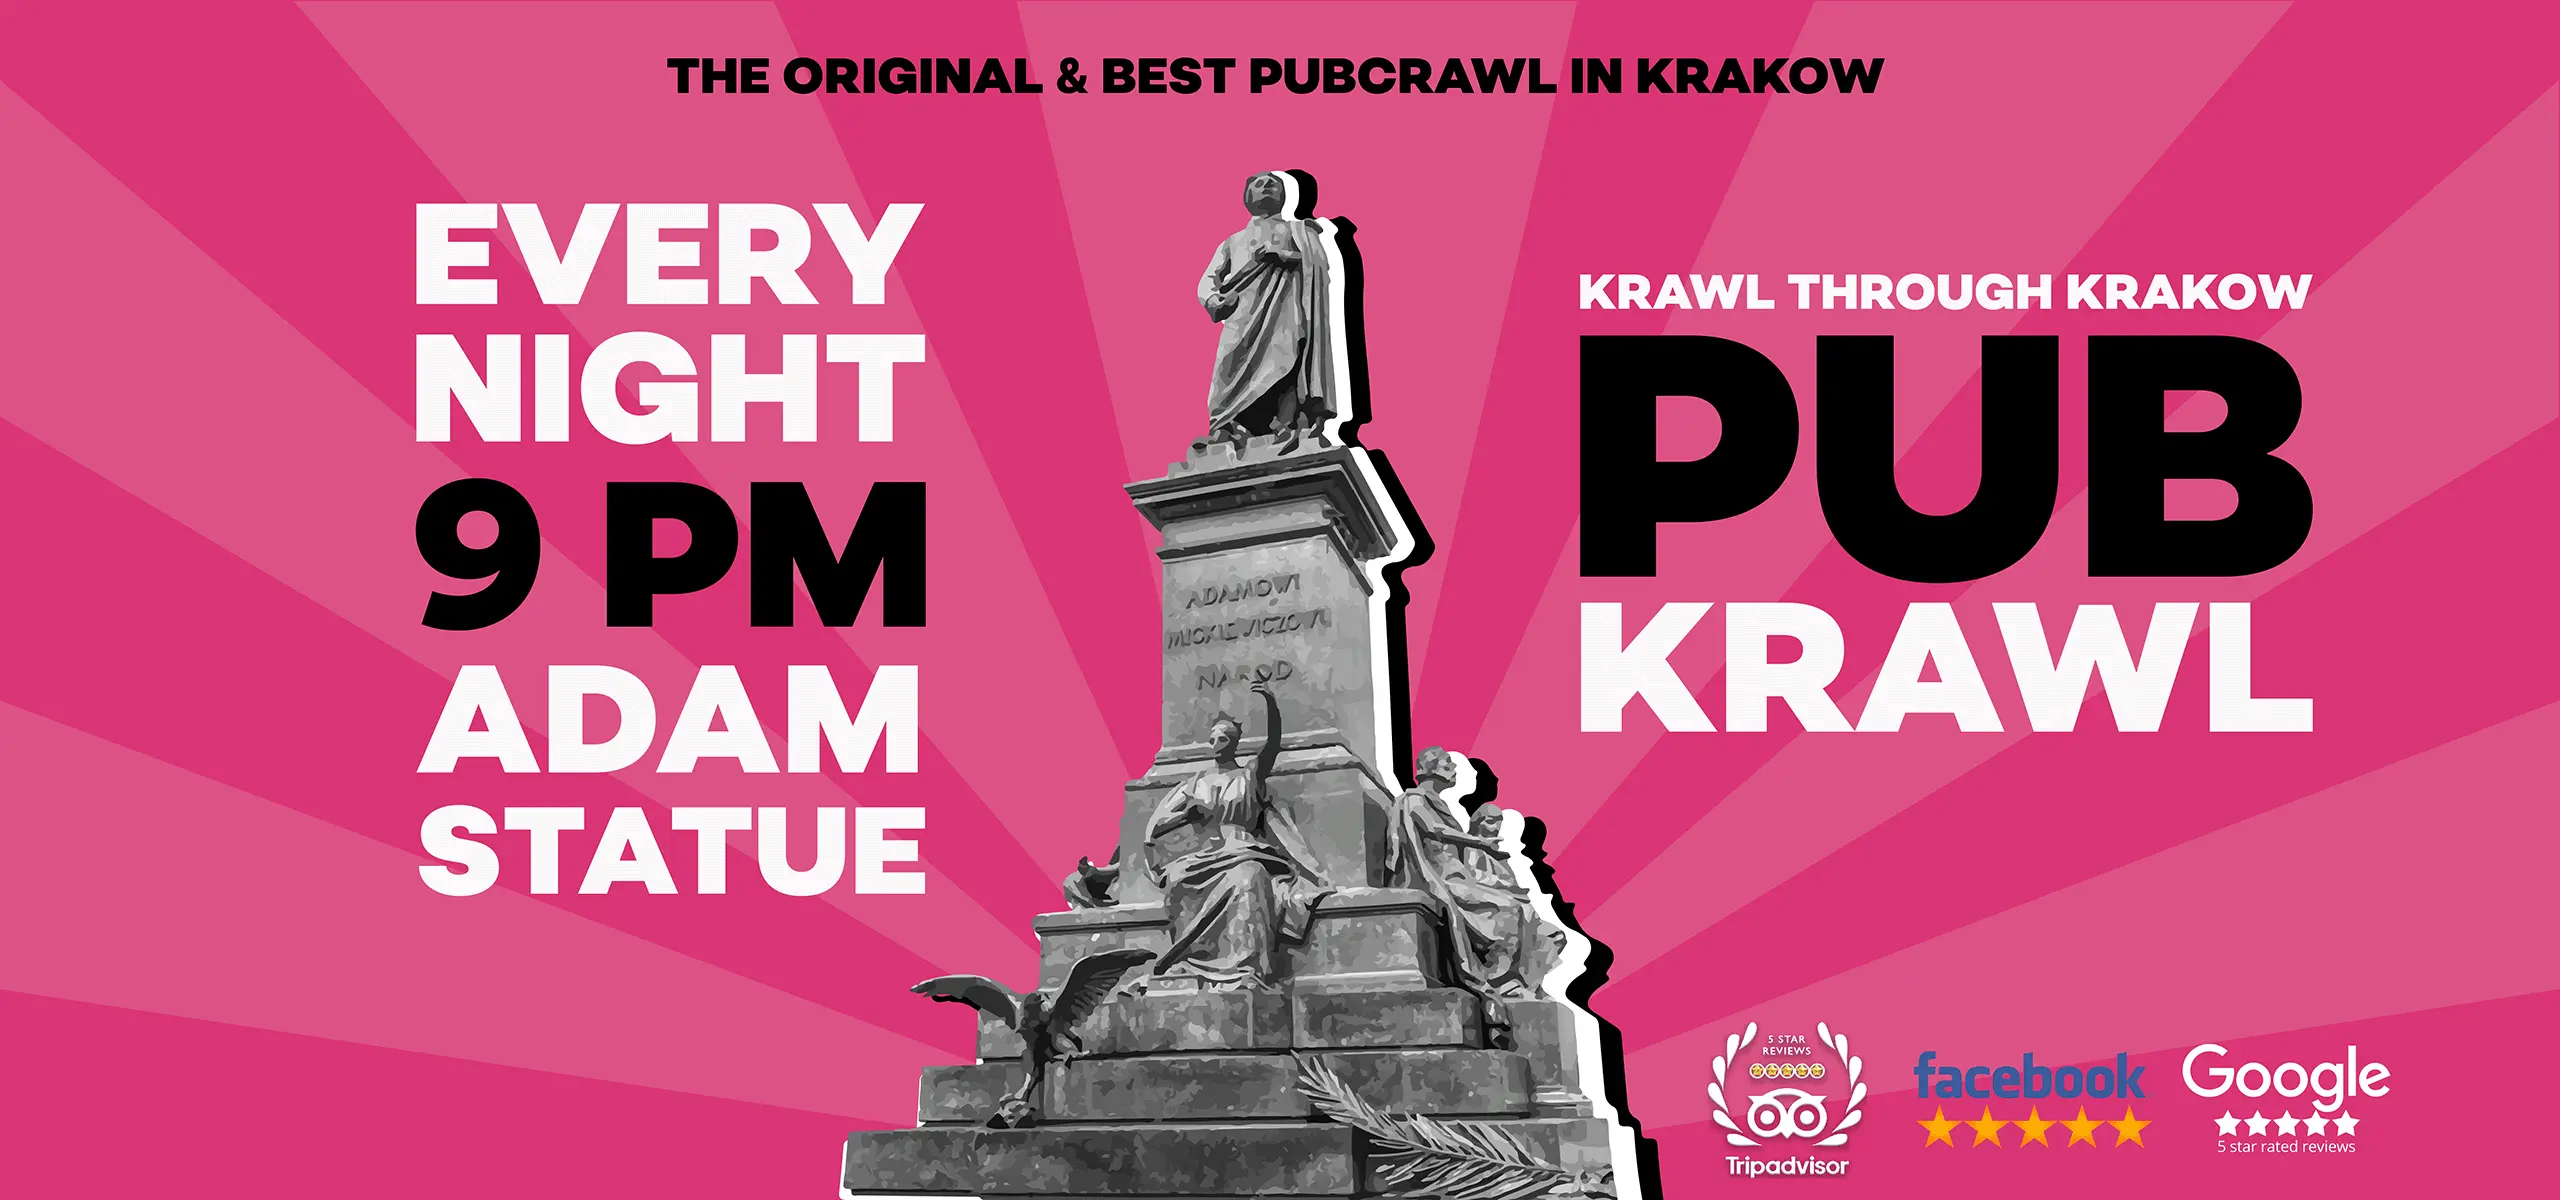 Advertisement for a Krawl Through Krakow pub crawl event starting at the Adam Statue at 9 pm